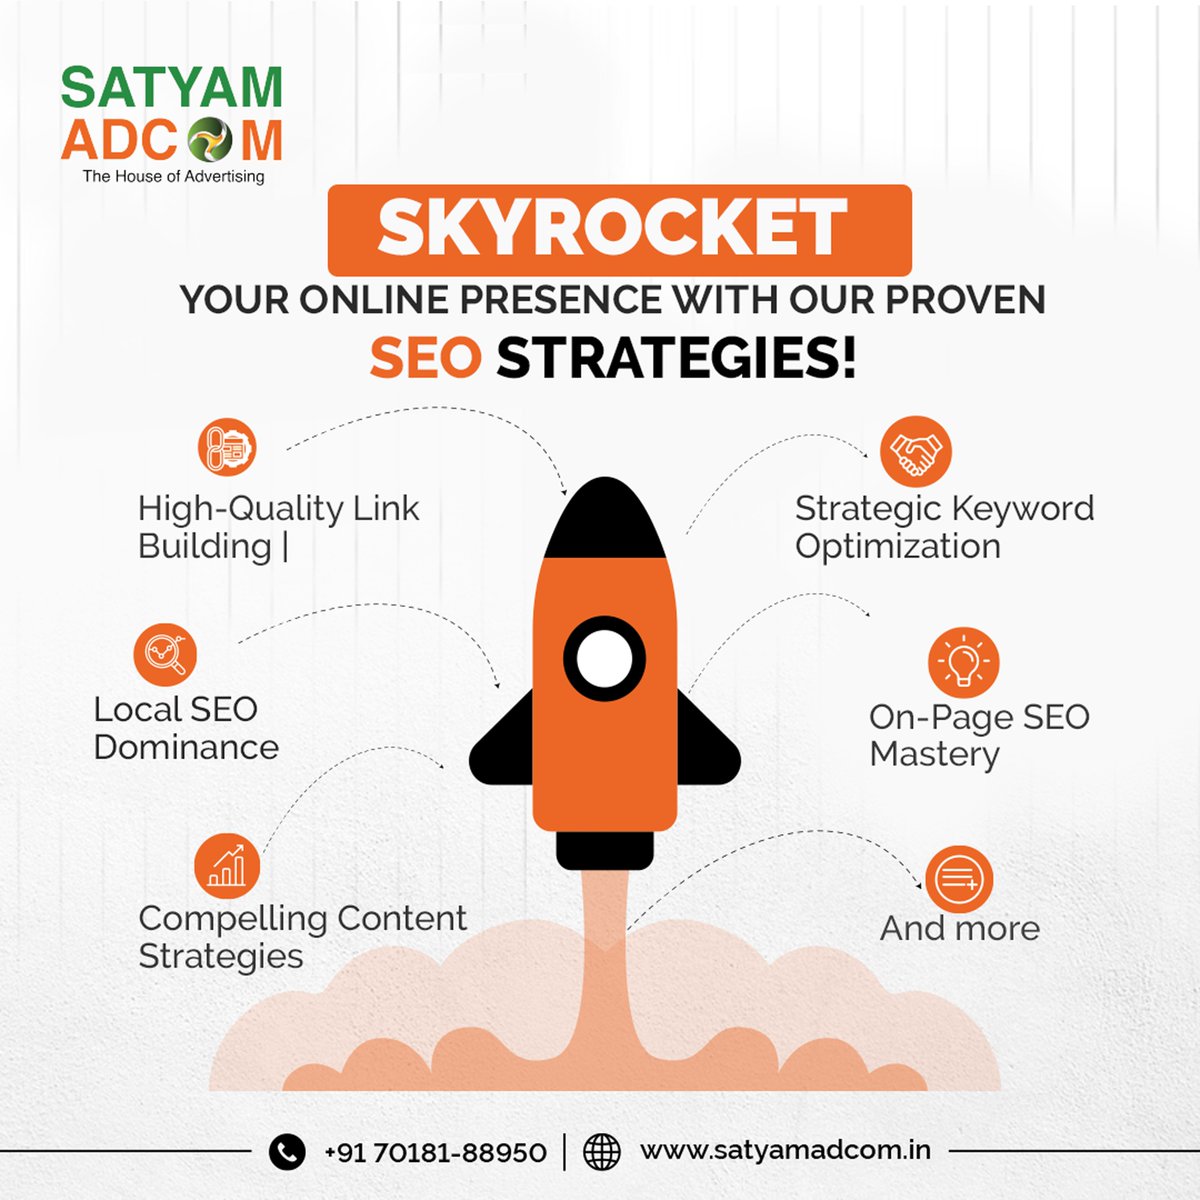 Satyam Adcom with Our Proven SEO Strategies! ✨🚀

Ready to climb the search engine ranks and be discovered by your target audience? 🌐
Our expert SEO team is here to amplify your digital presence and drive organic traffic to new heights.

#digitalmarketing #OnlineGrowth